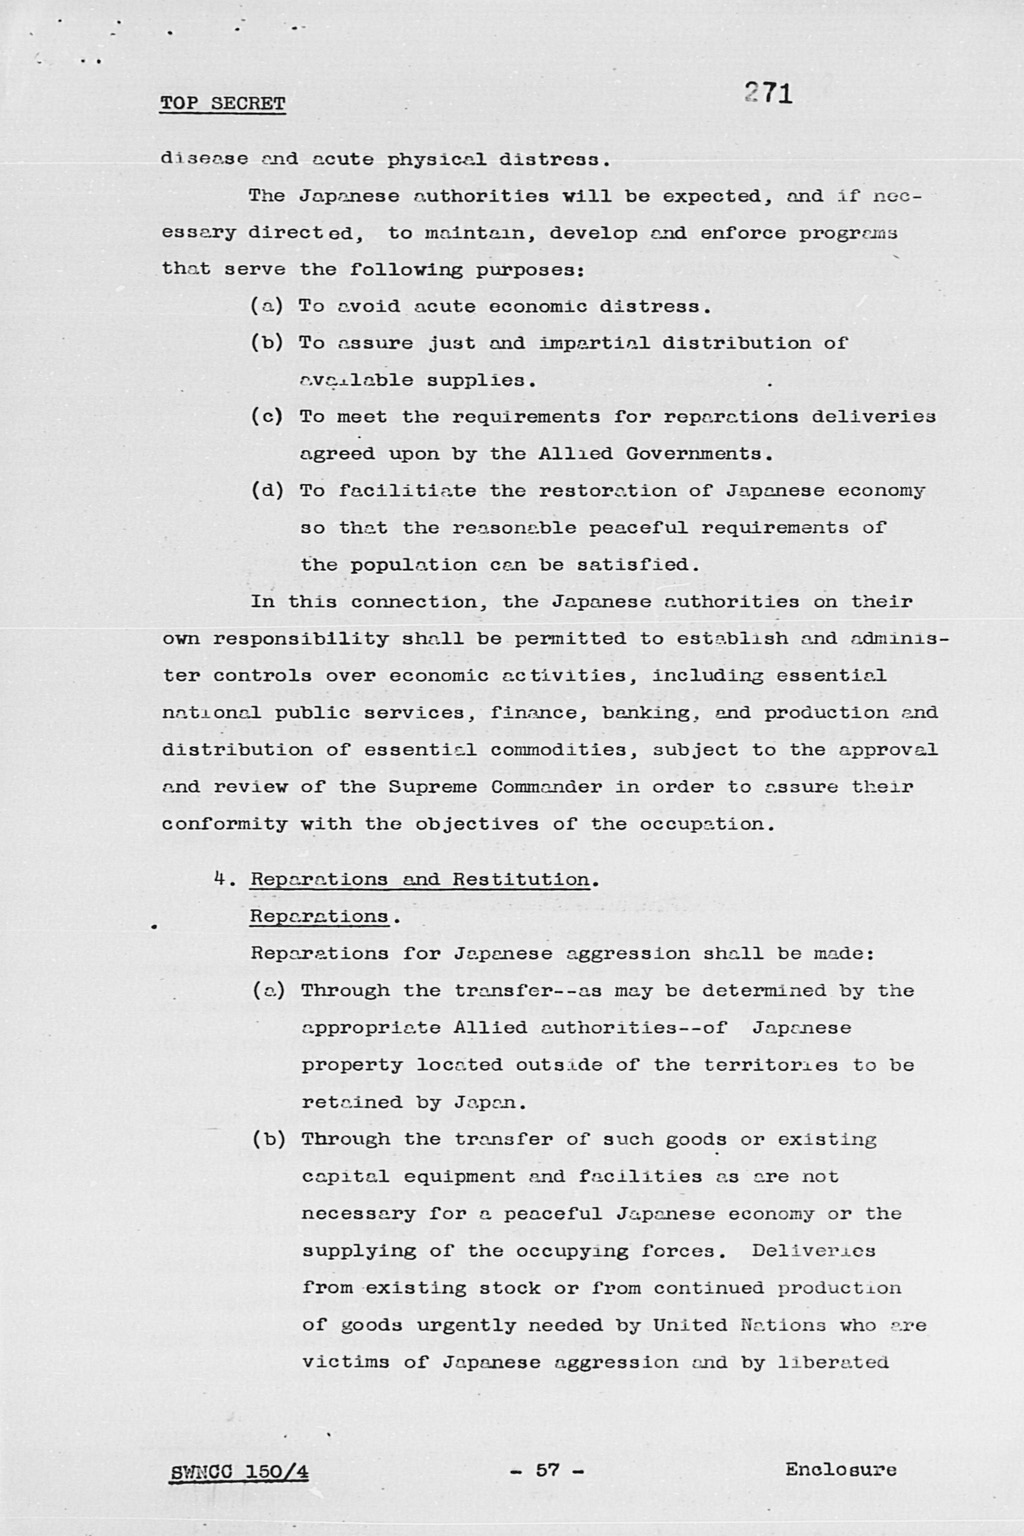 [United States Initial Post-Surrender Policy for Japan (SWNCC150/4)](Larger image)